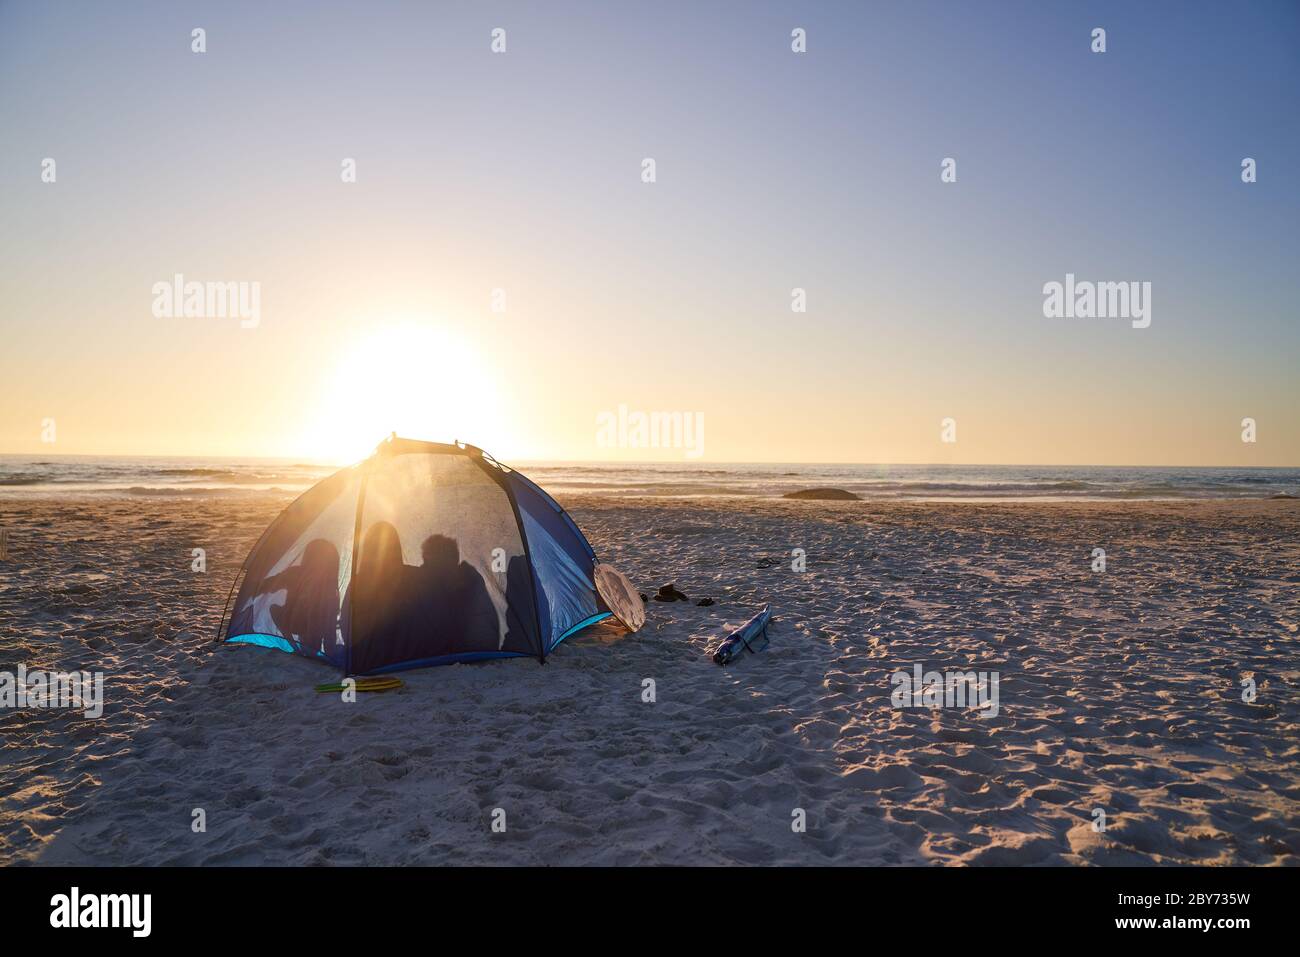 Silhouette of family inside tent on sunny beach at sunset Stock Photo